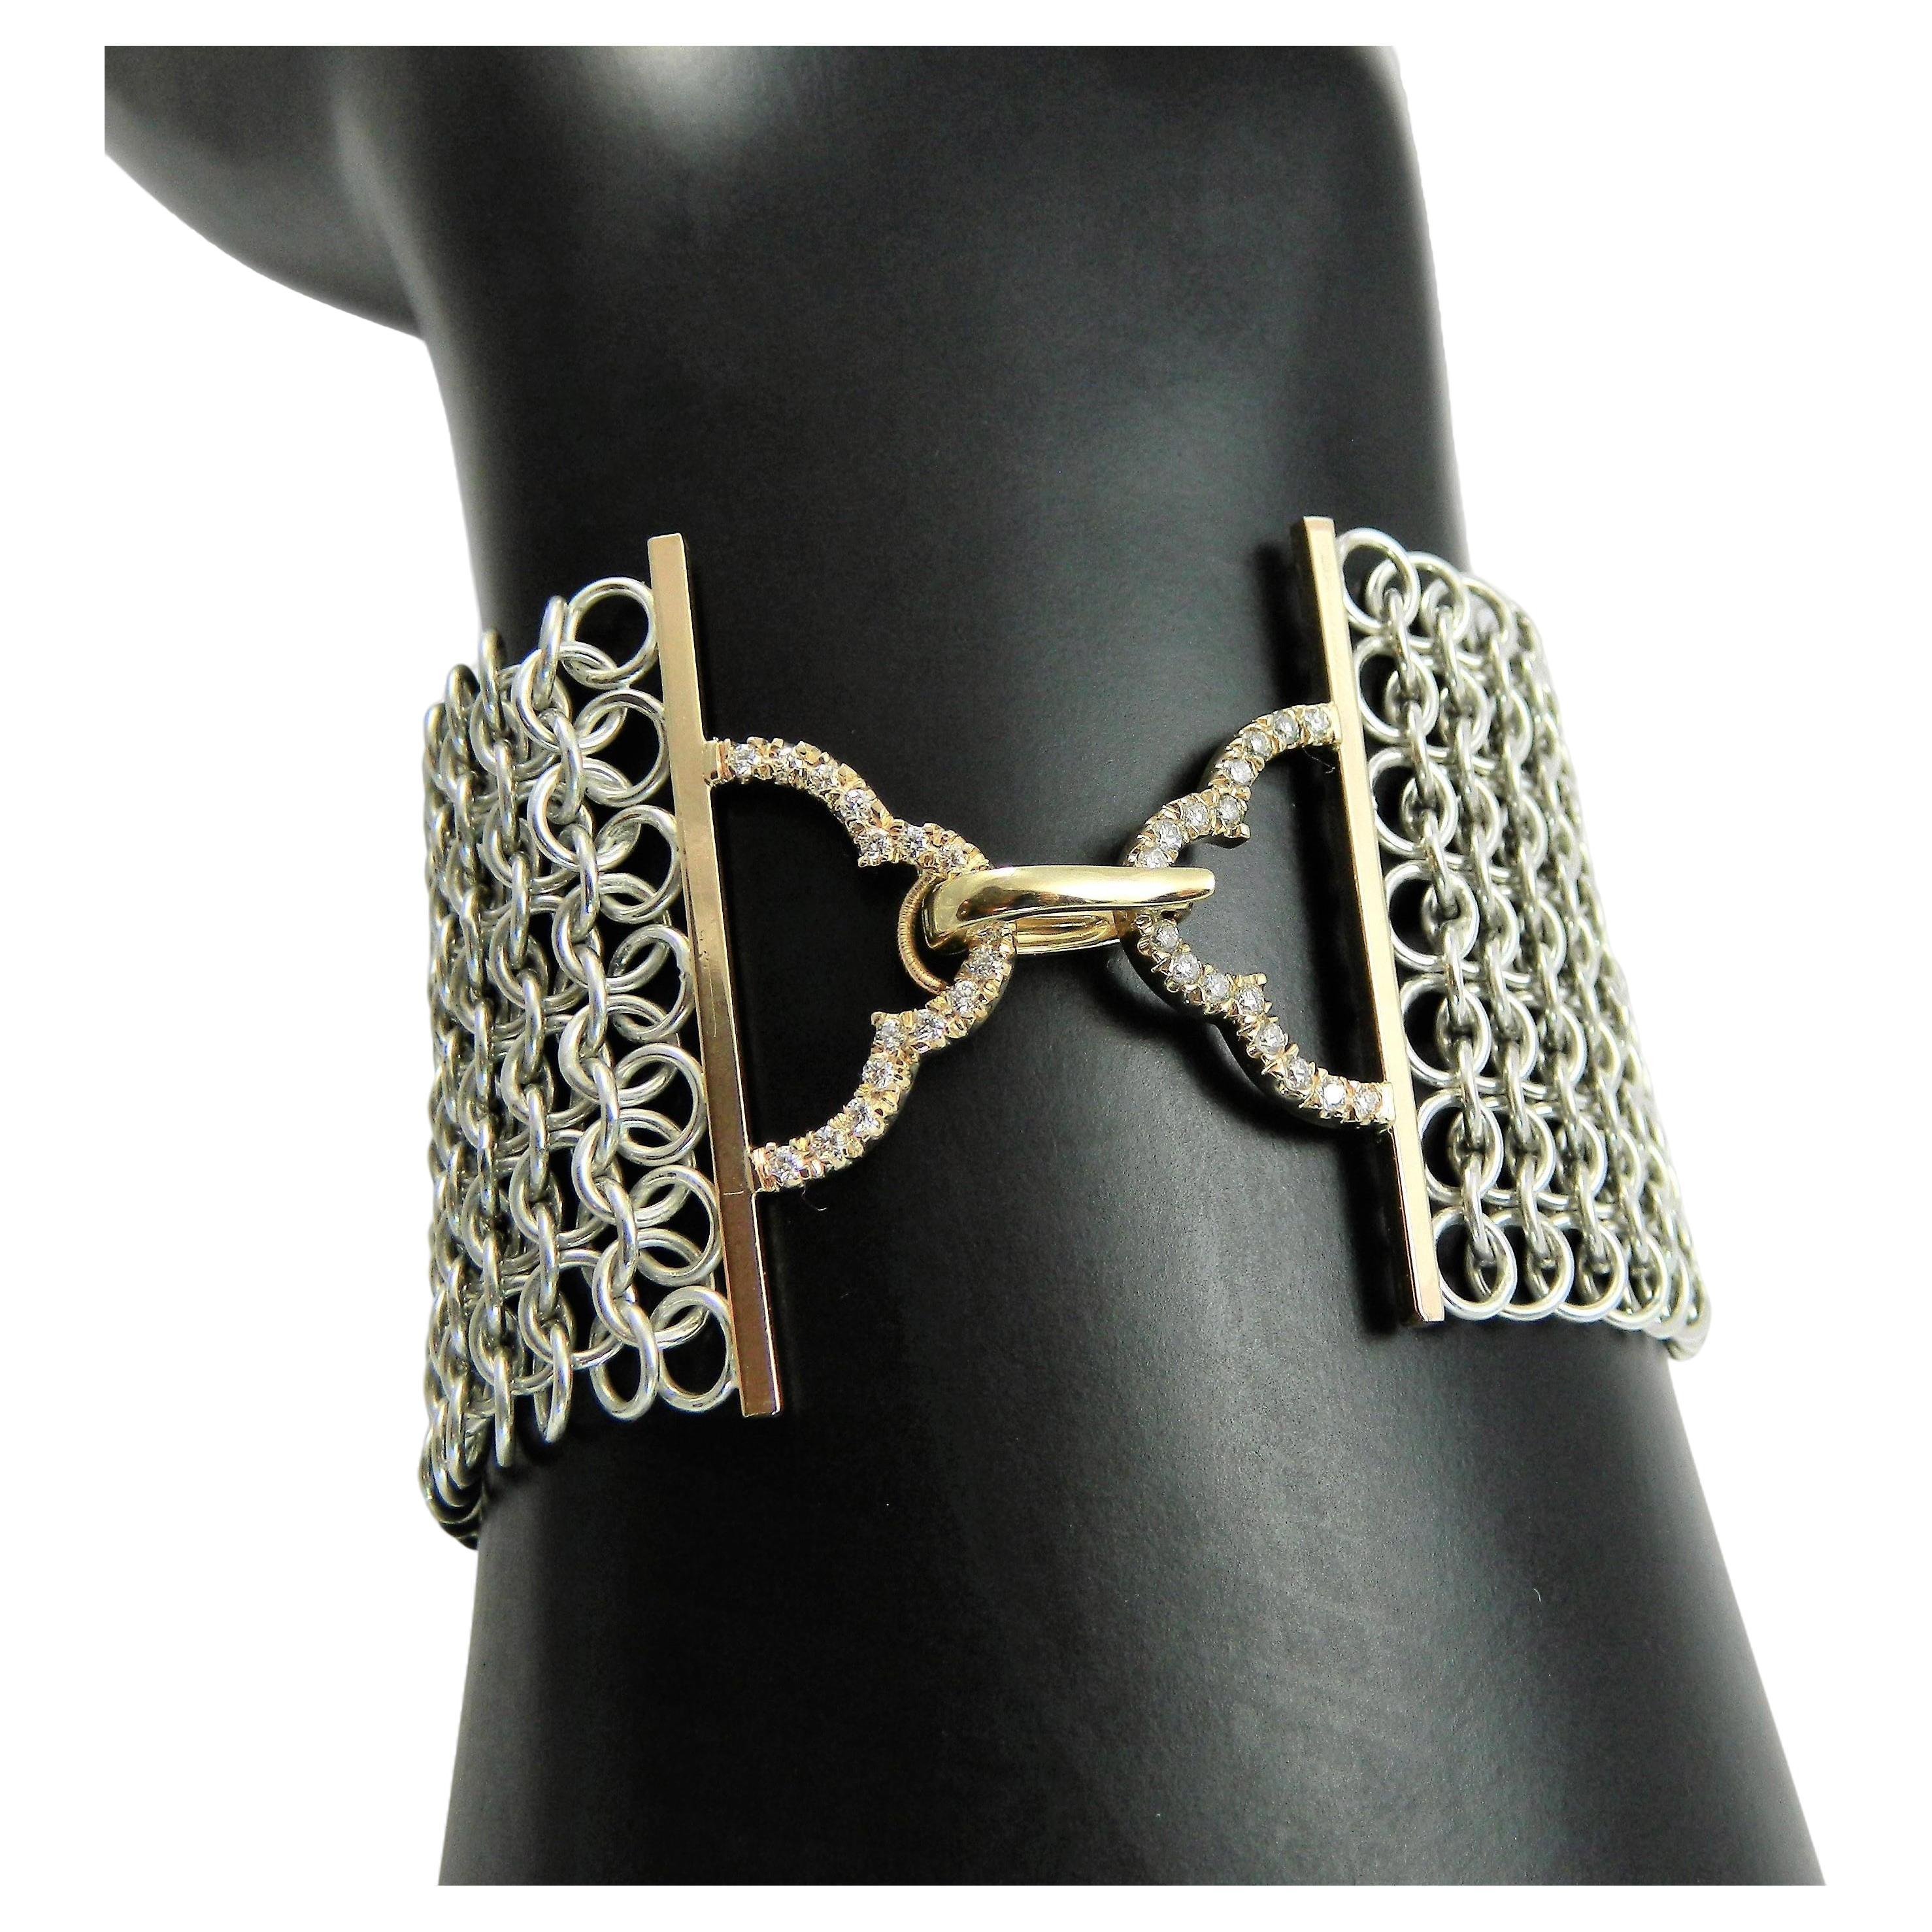 Deco Power Bracelet with Diamonds, Silver, 14K Gold and Japanese made Chainmail